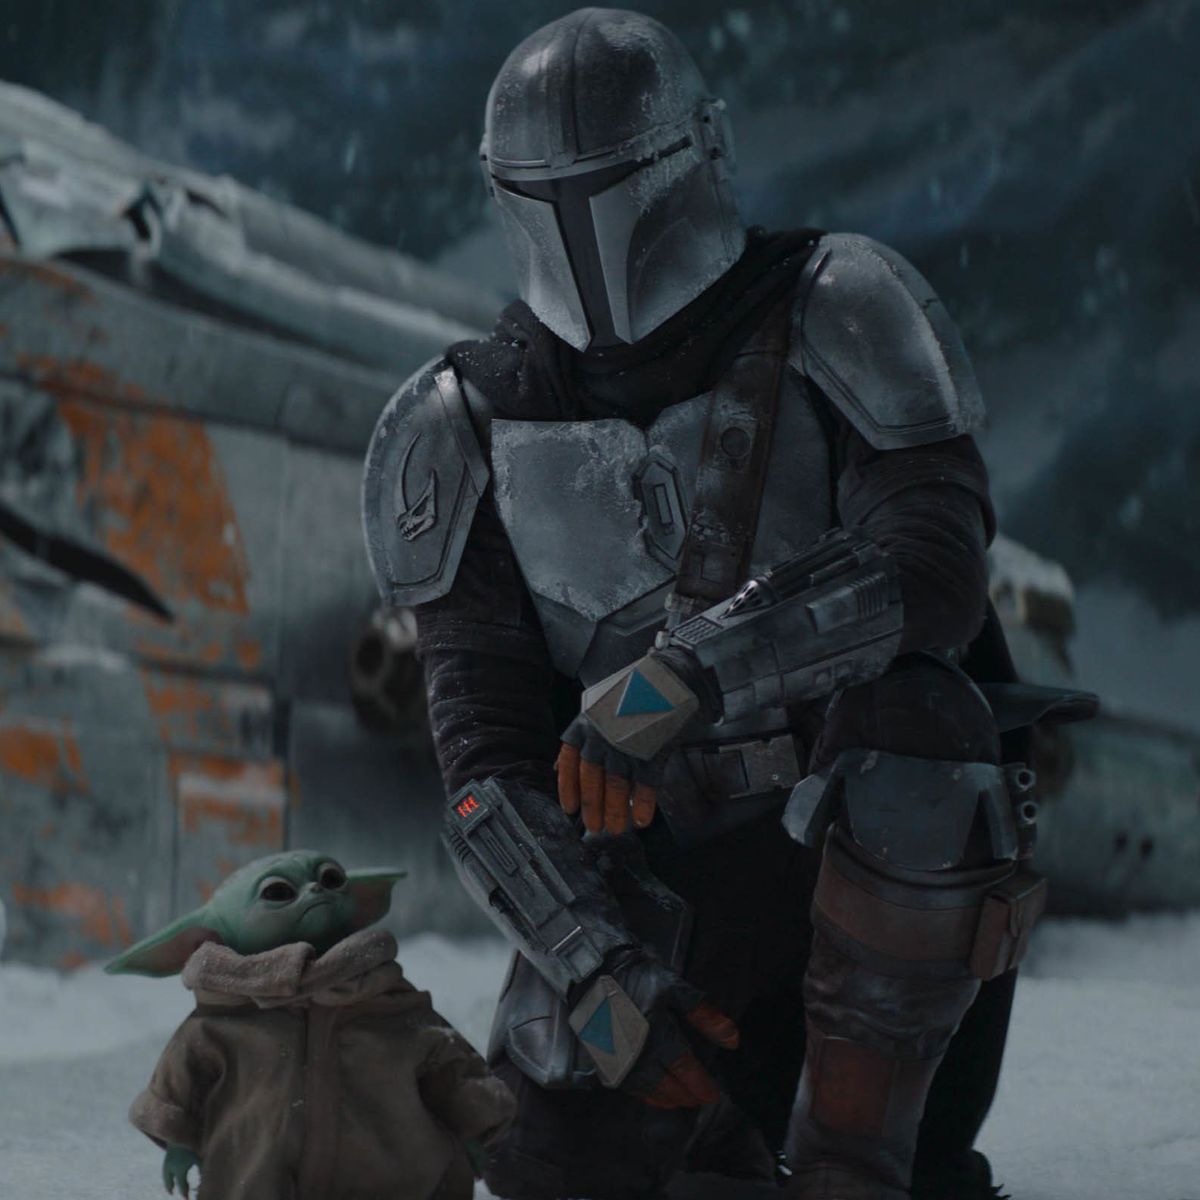 The Mandalorian takes a knee beside Grogu and contemplates the damage to his ship.